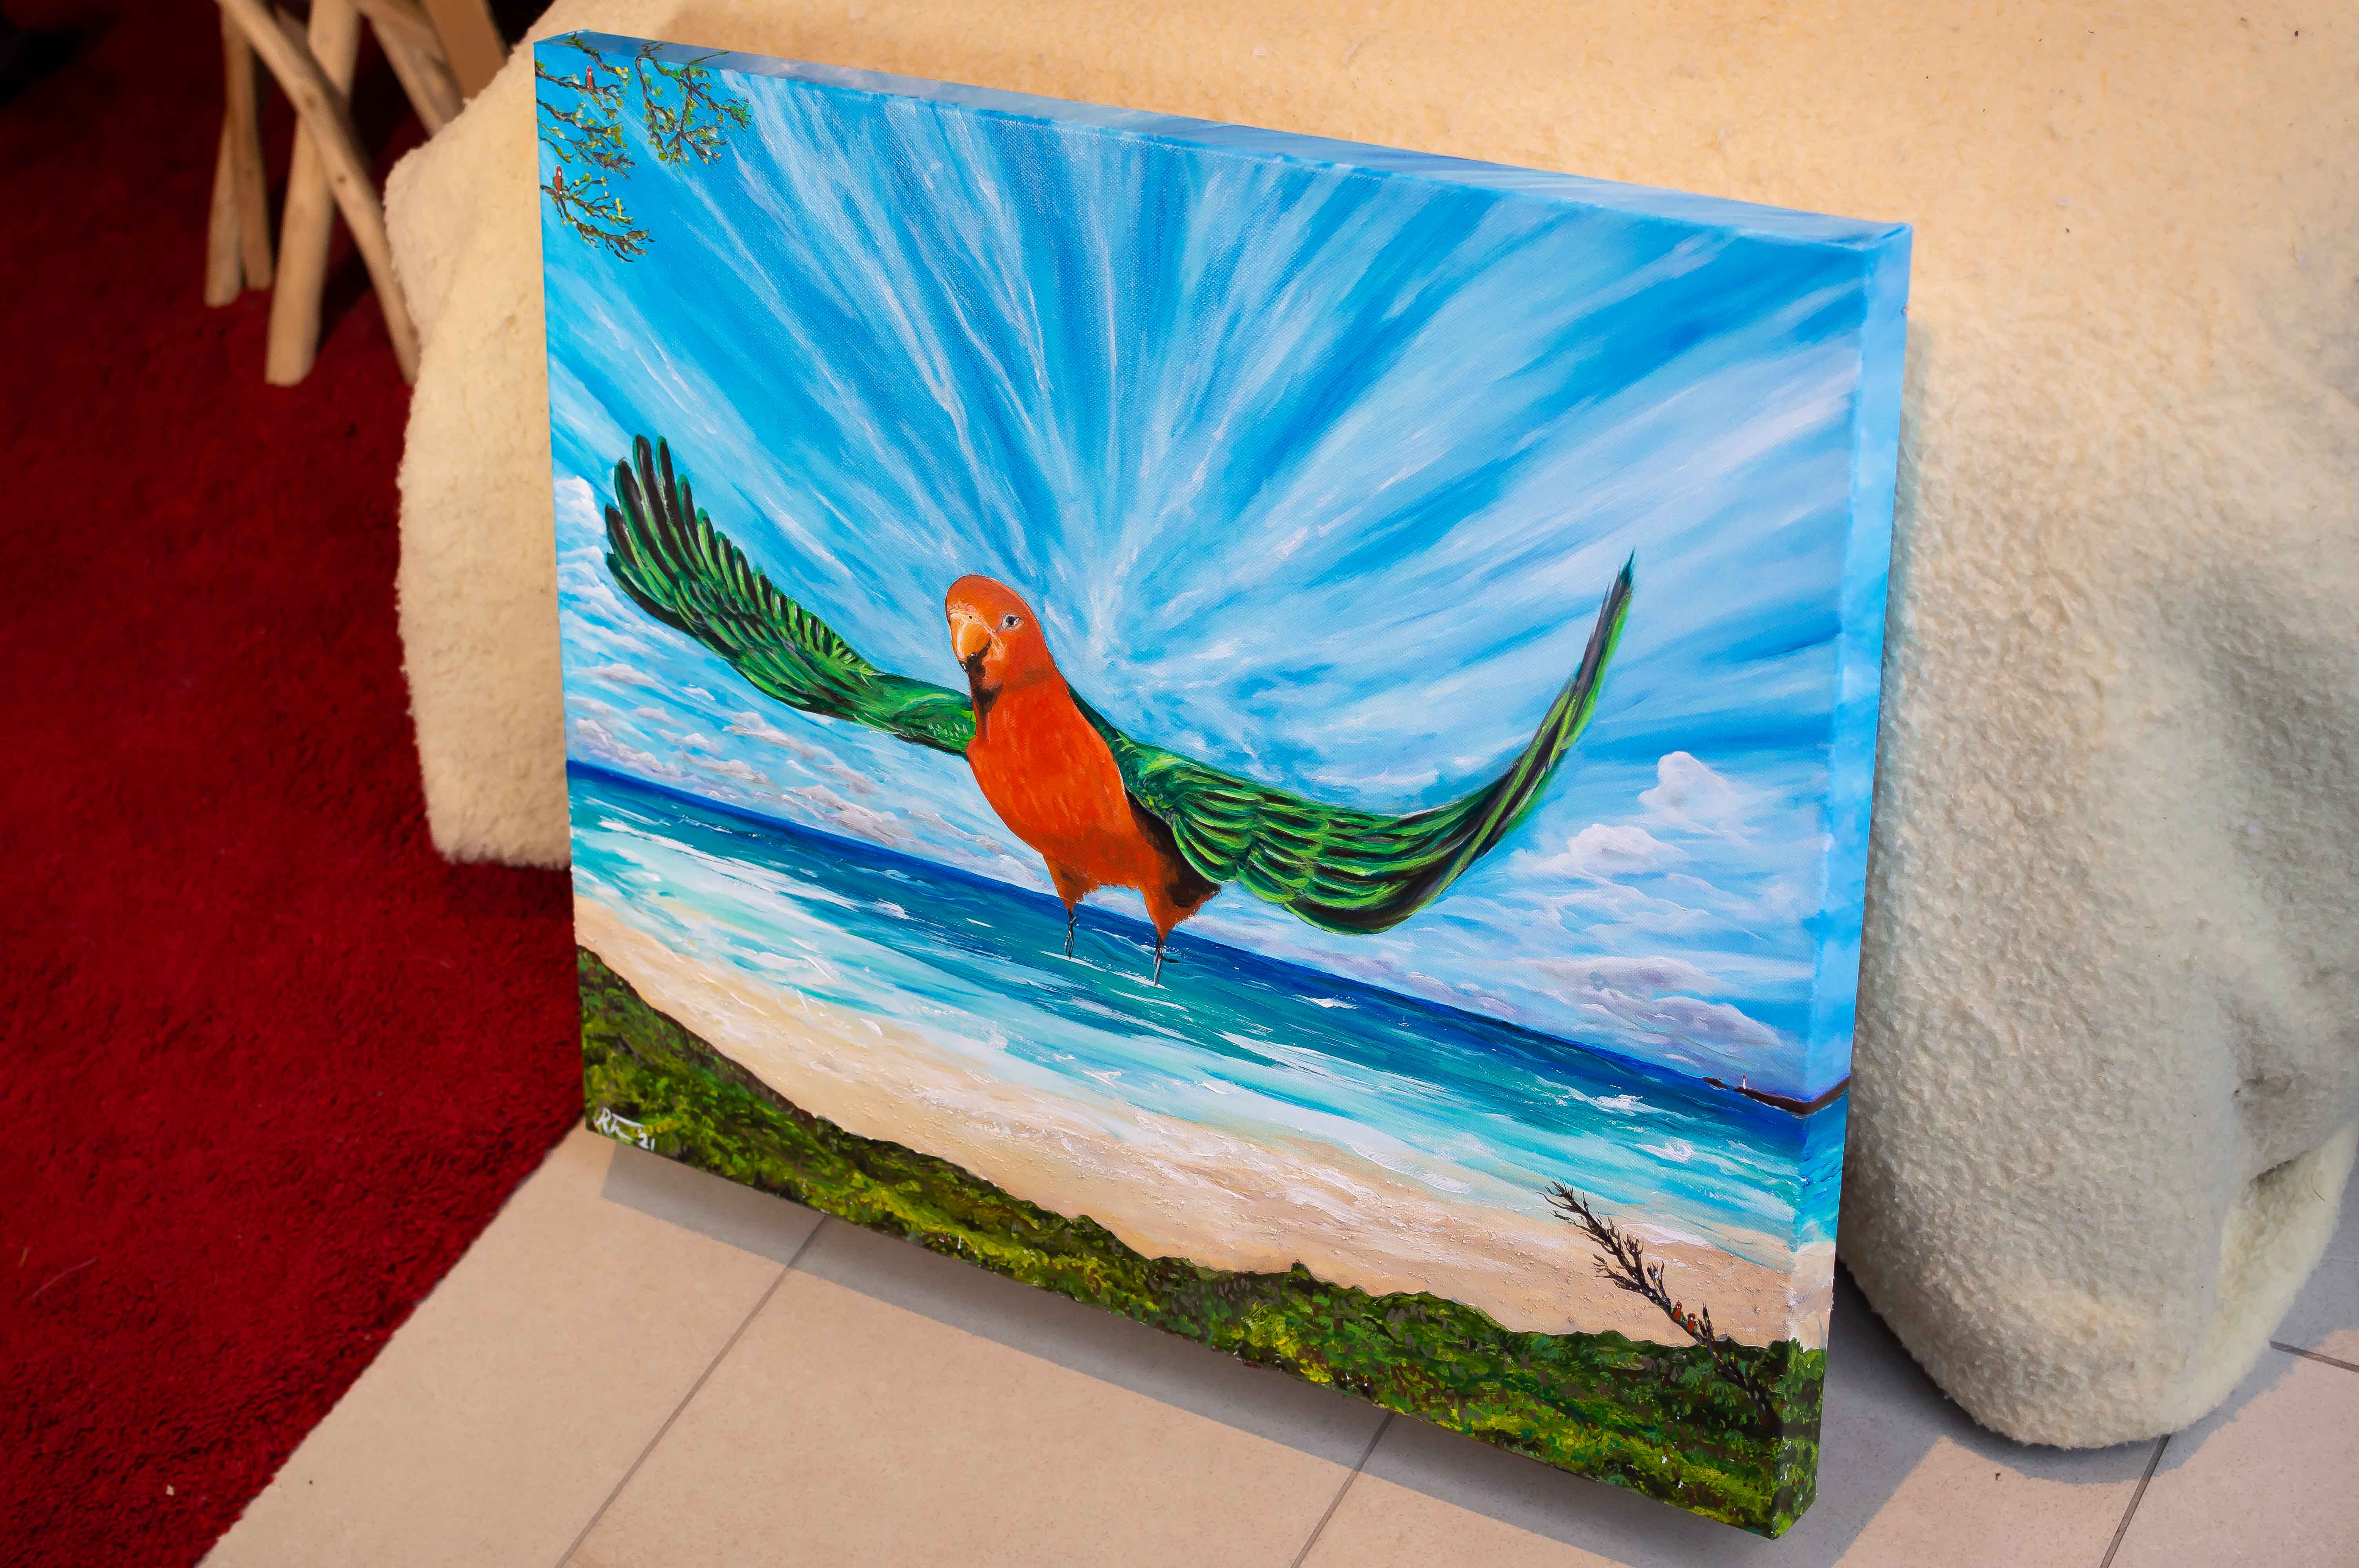 Acylic painting of a red and green Australian King Parrot flying over a large beach landscape. Dramatic clouds and white sandy beaches emphasise the scene and the figure of the parrot in the centre of the painting.